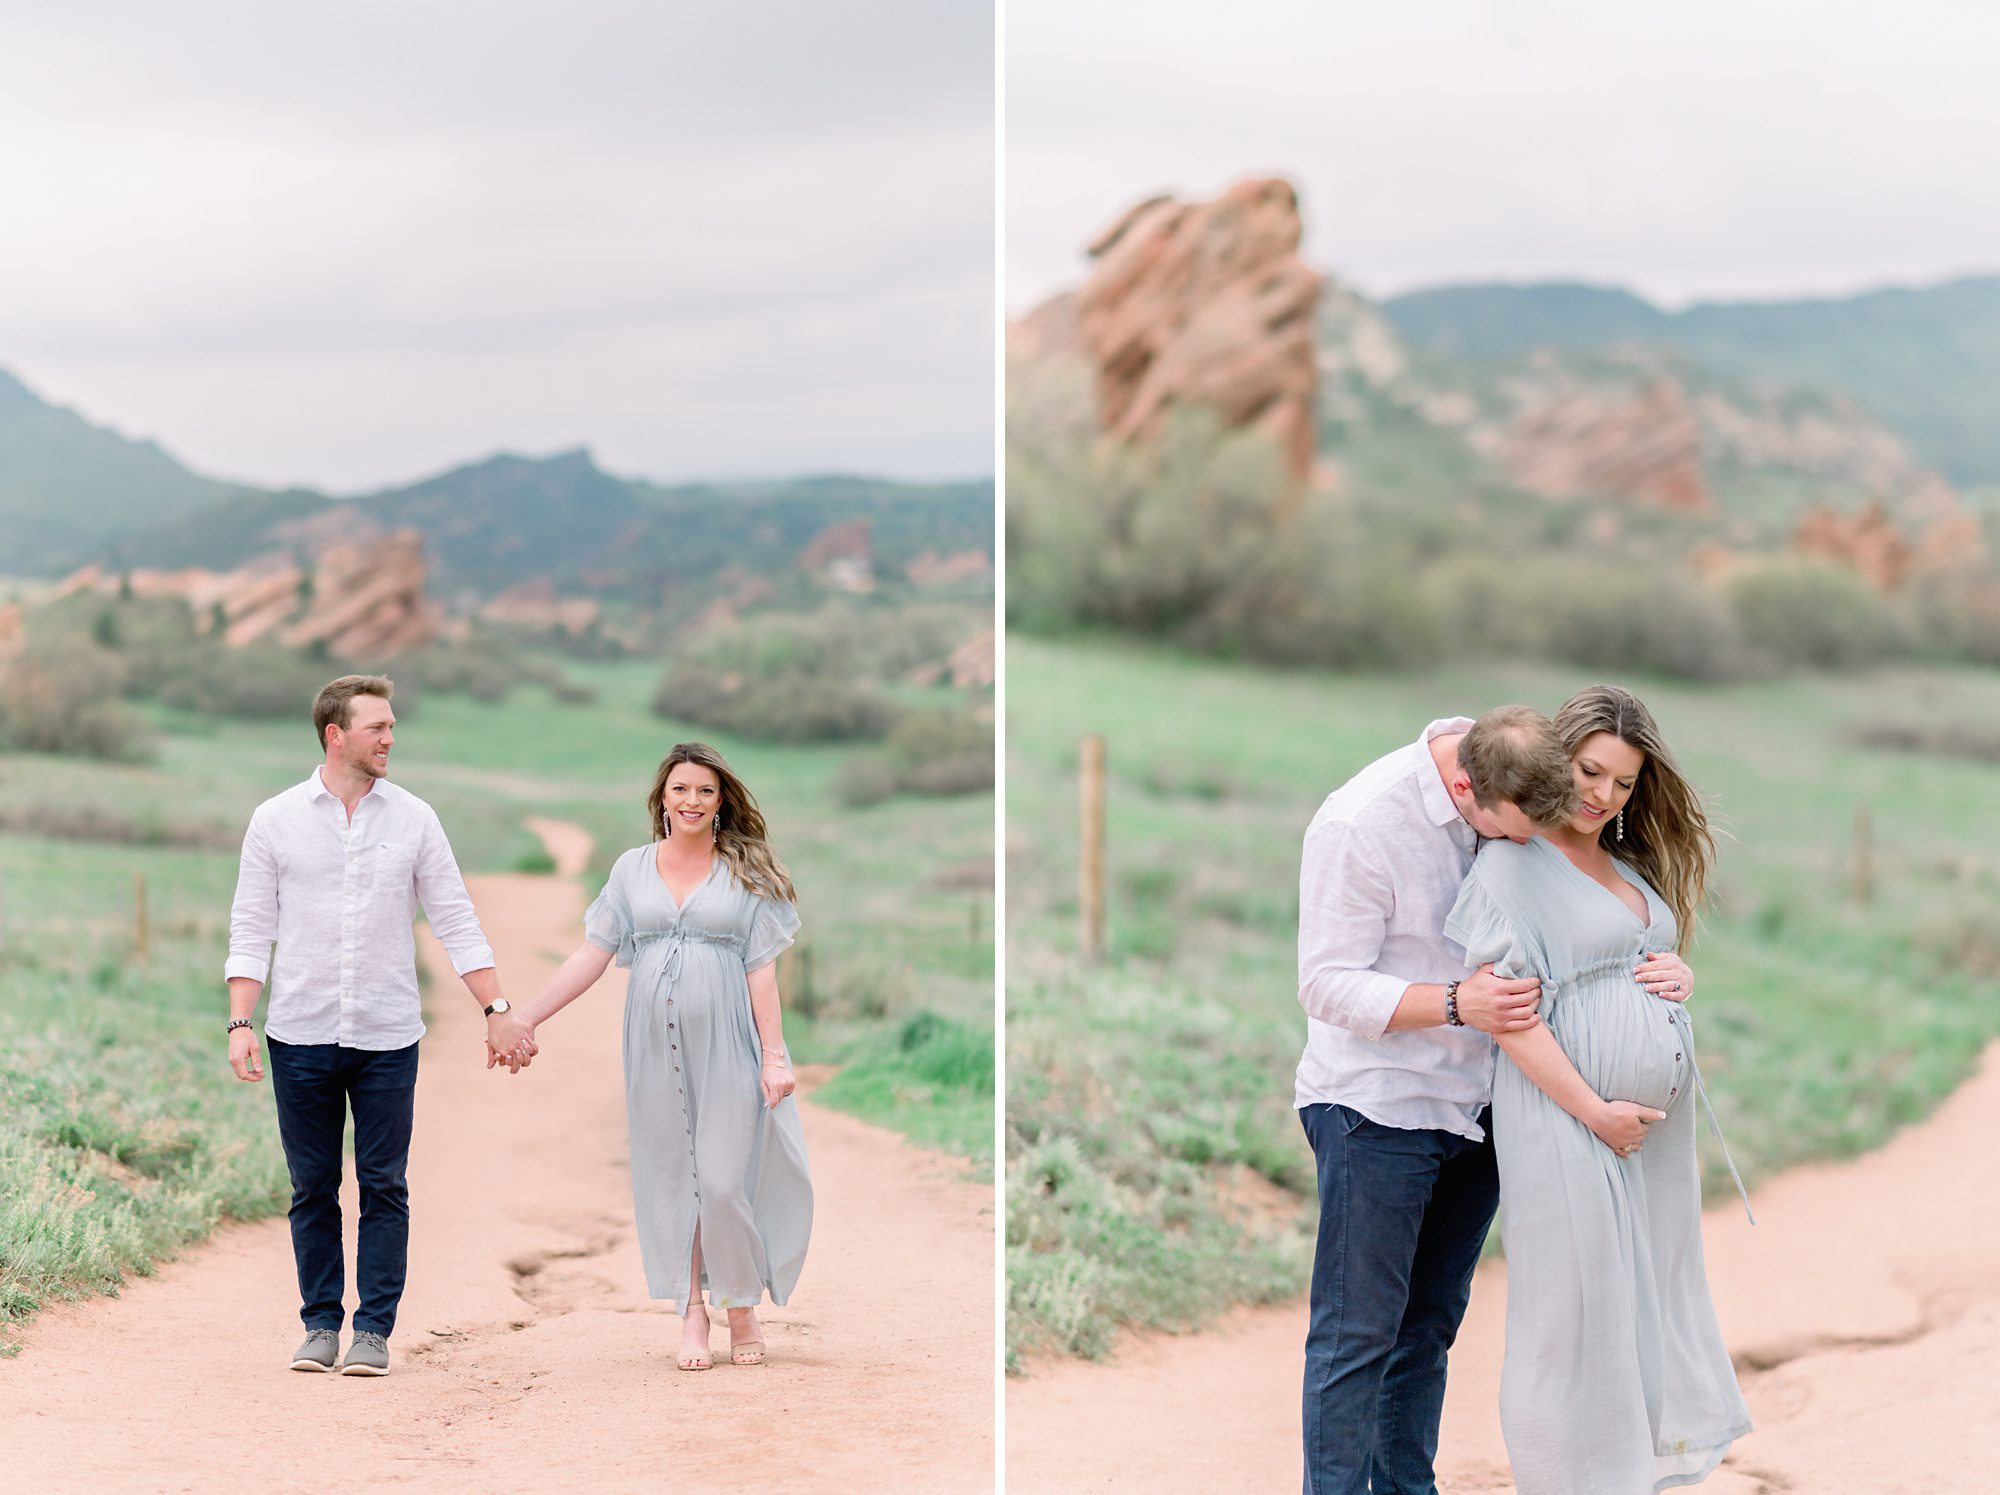 A husband and wife get maternity photos done with their dogs at scenic South Valley Park in Denver Colorado, and will soon welcome their first child.